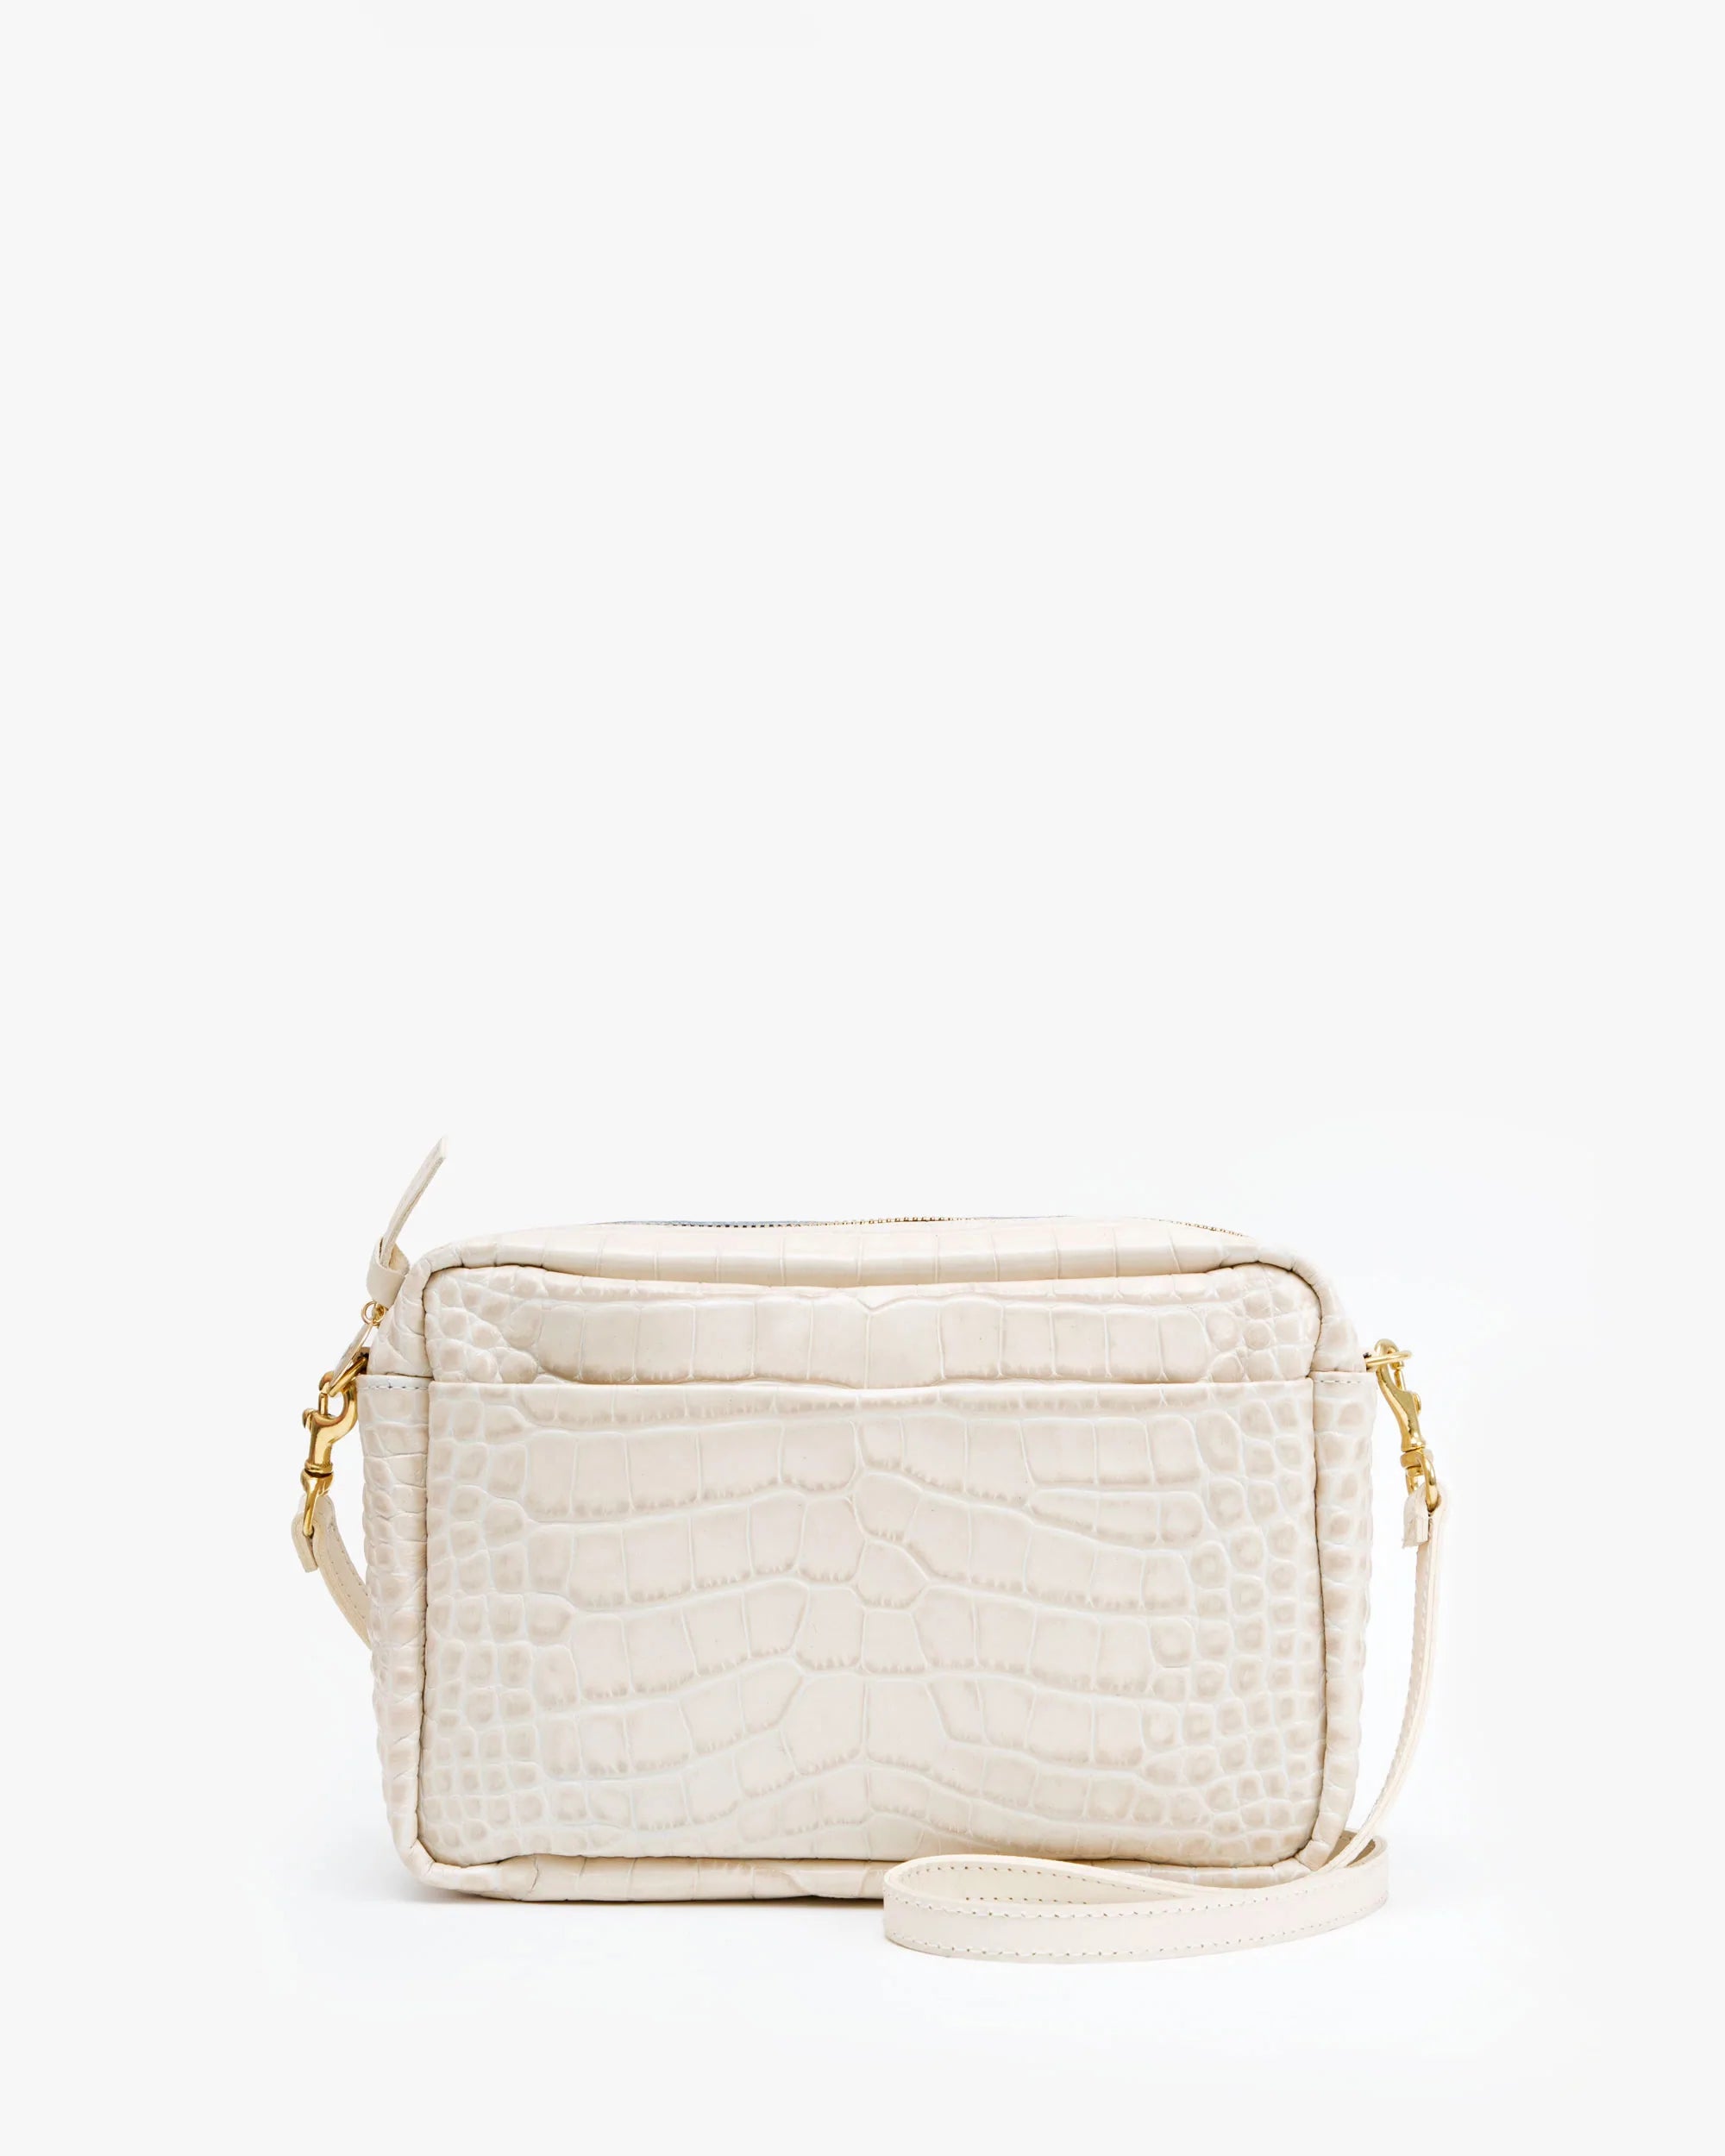 Clare V. Marisol w/ Front Pocket in Cream Perf - Bliss Boutiques